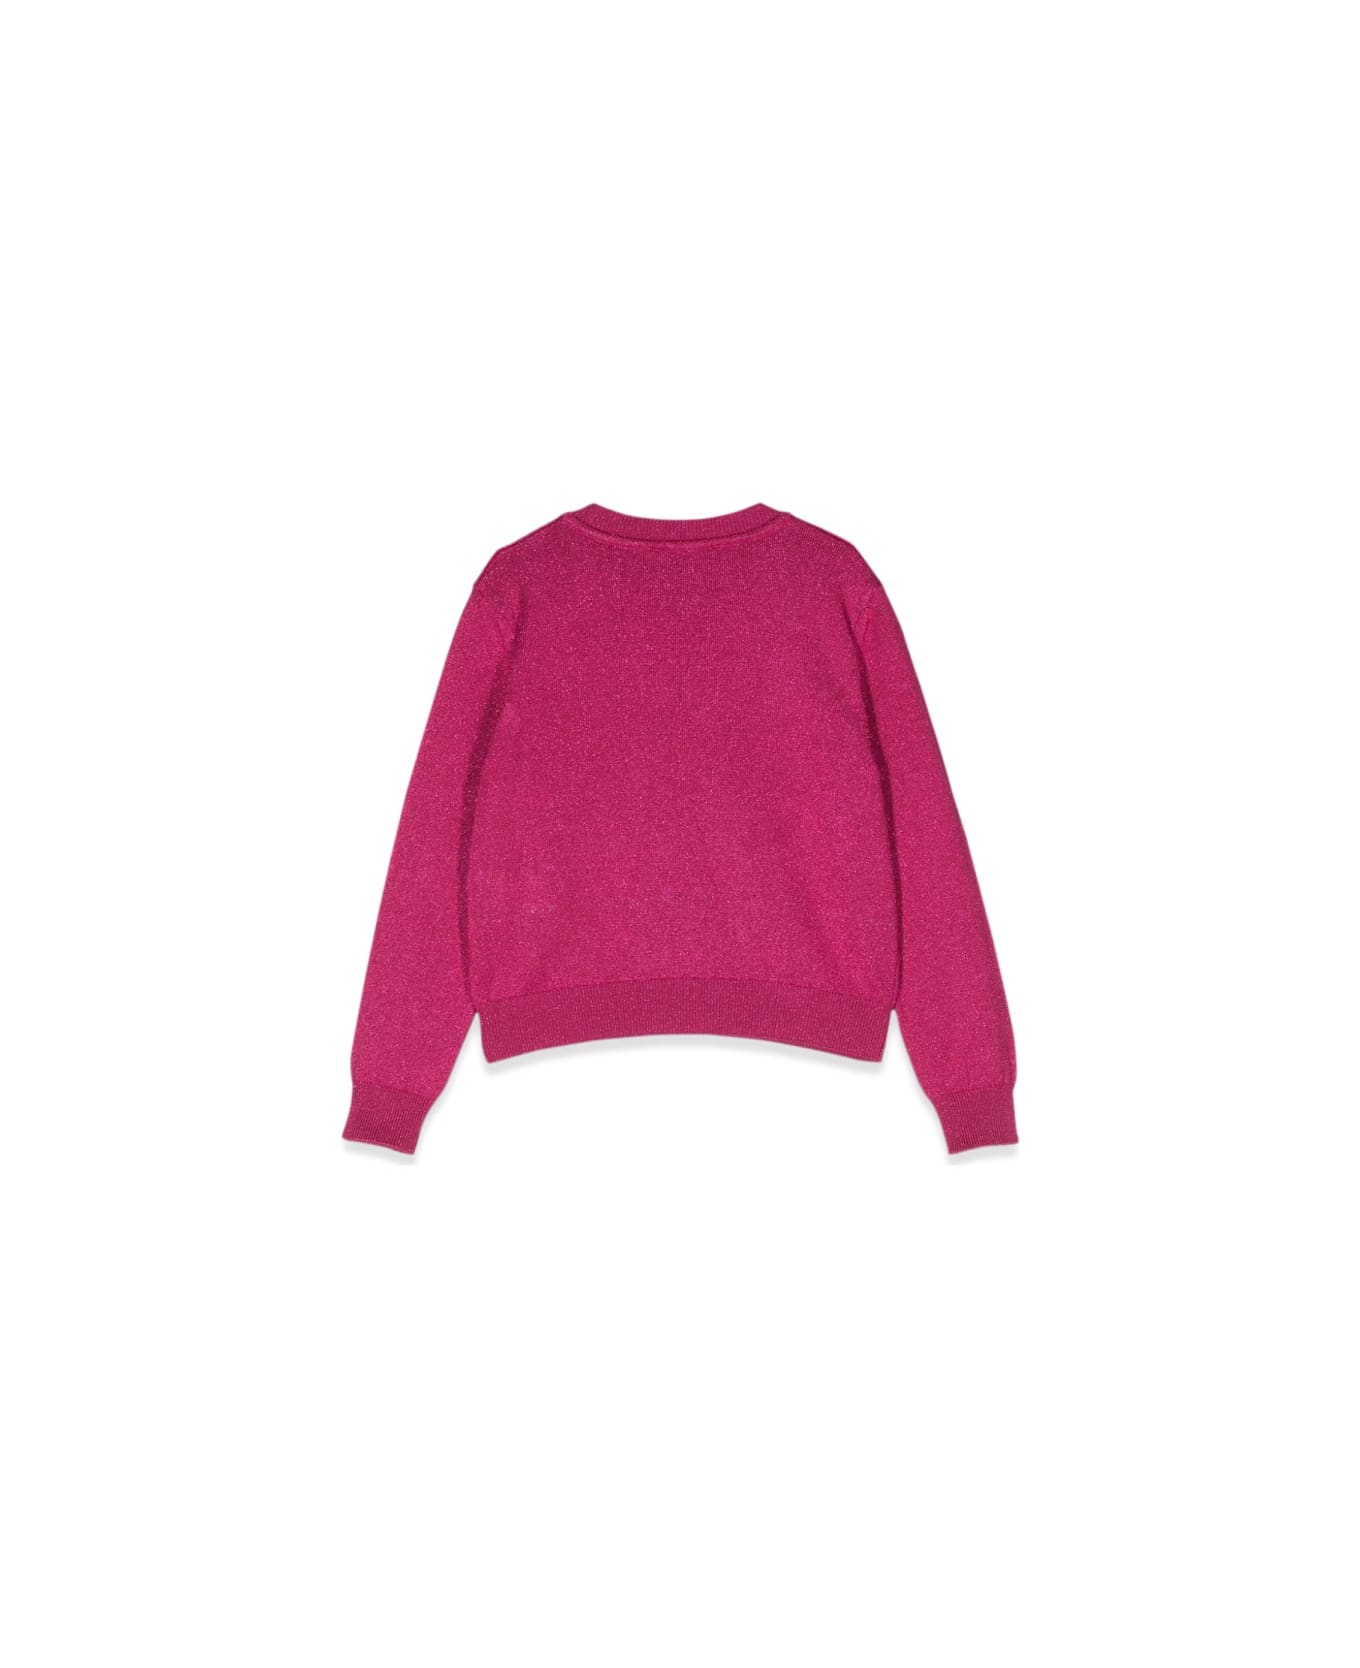 Versace Crew Neck Pullover With Embroidered Logo - FUCHSIA